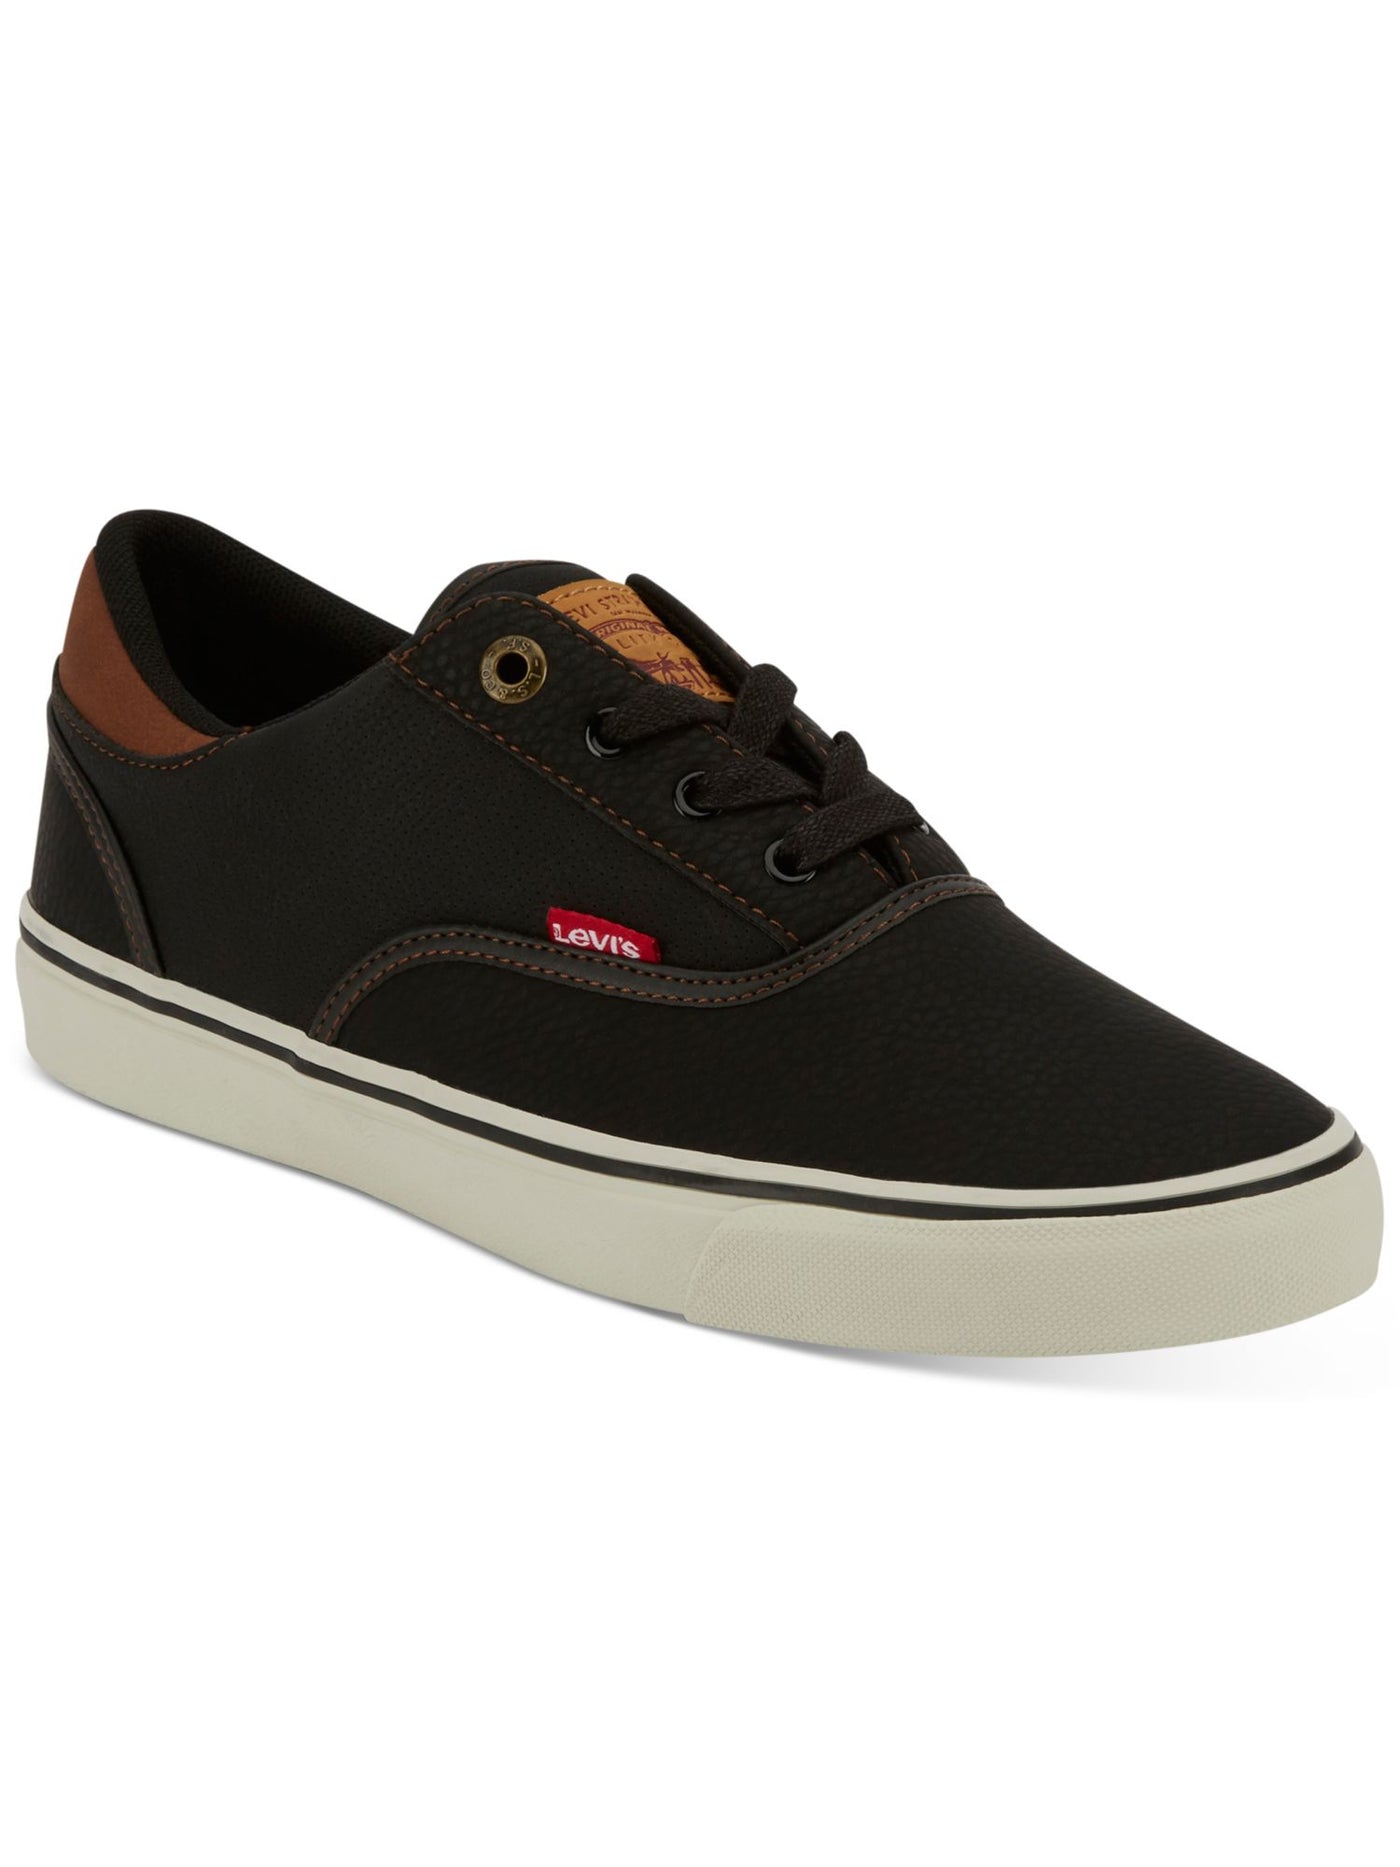 LEVI'S Mens Black Cushioned Comfort Ethan Round Toe Lace-Up Sneakers Shoes 13